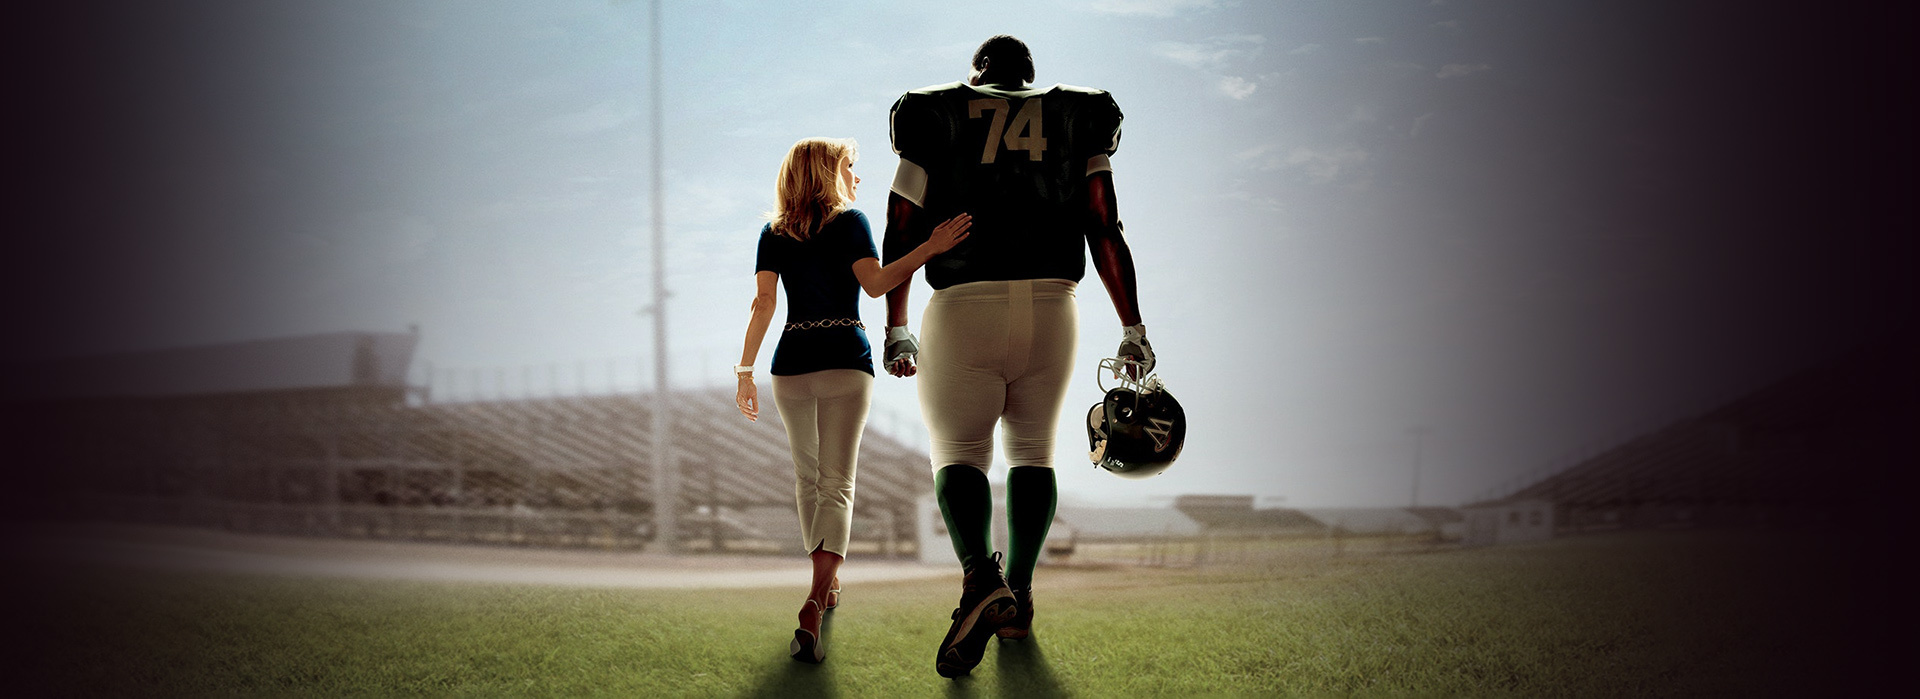 Movie poster The Blind Side